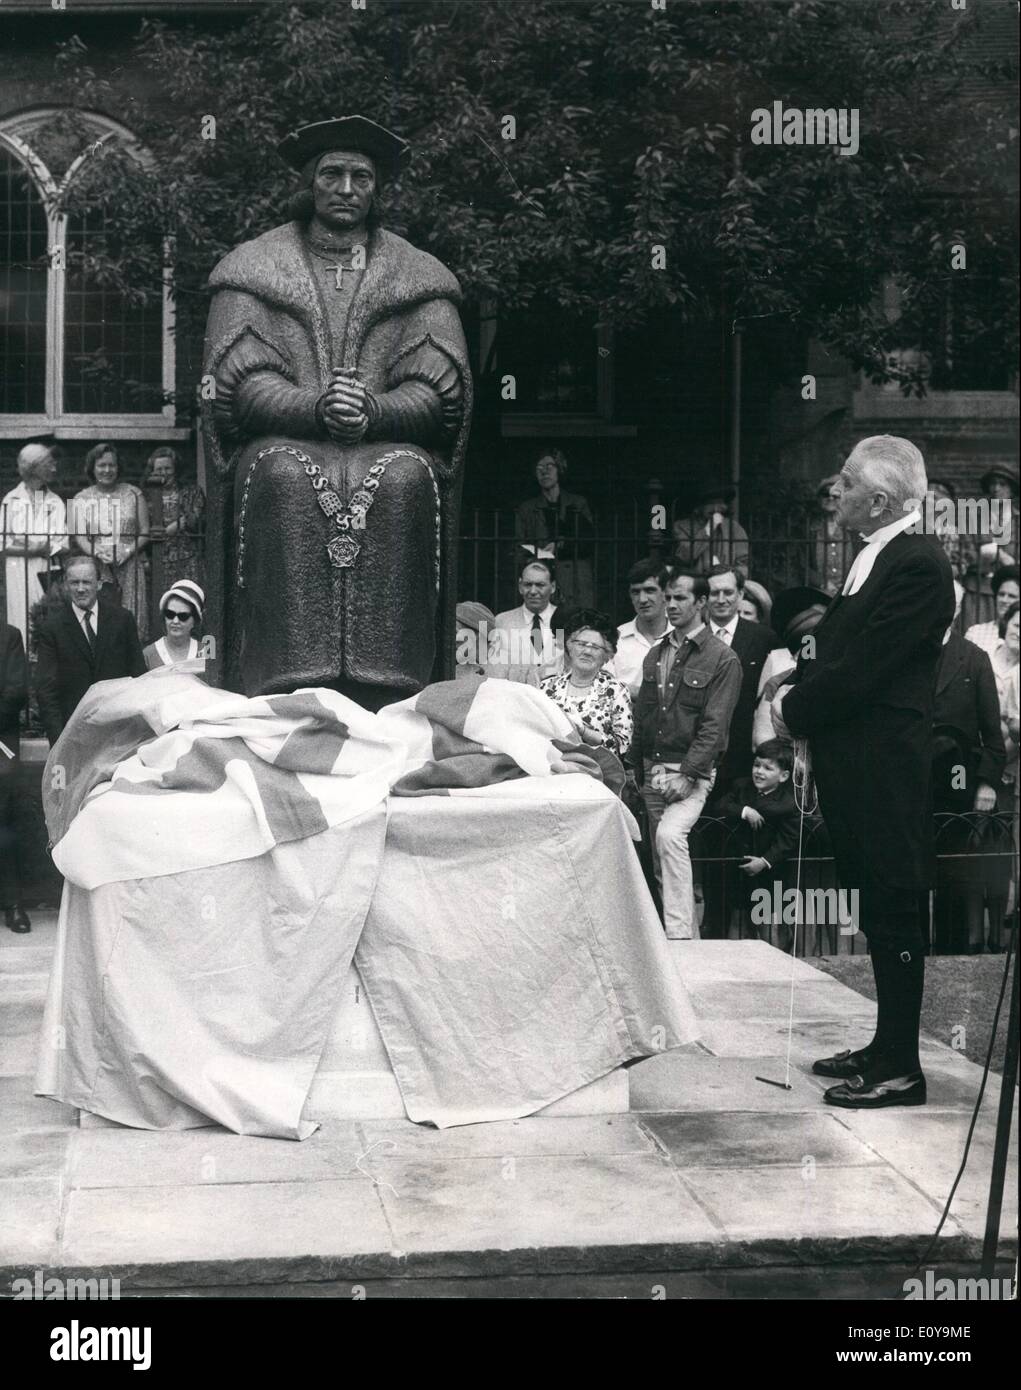 Jun. 06, 1969 - Dr. Horace King Unveils statue to Thomas More in Chelsea Old Church: Dr. Horace King. Speaker of the House Commons, today unveiled a statue to St. Thomas More in Chelsea Old Church. Dr. Michael Ramsey, The Archbishop of Canterbury, was present at the ceremony, together with Cardinal Neeman. Photo shows Dr. Horace King Performs the unveiling ceremony at Chelsea Old Church today. Stock Photo